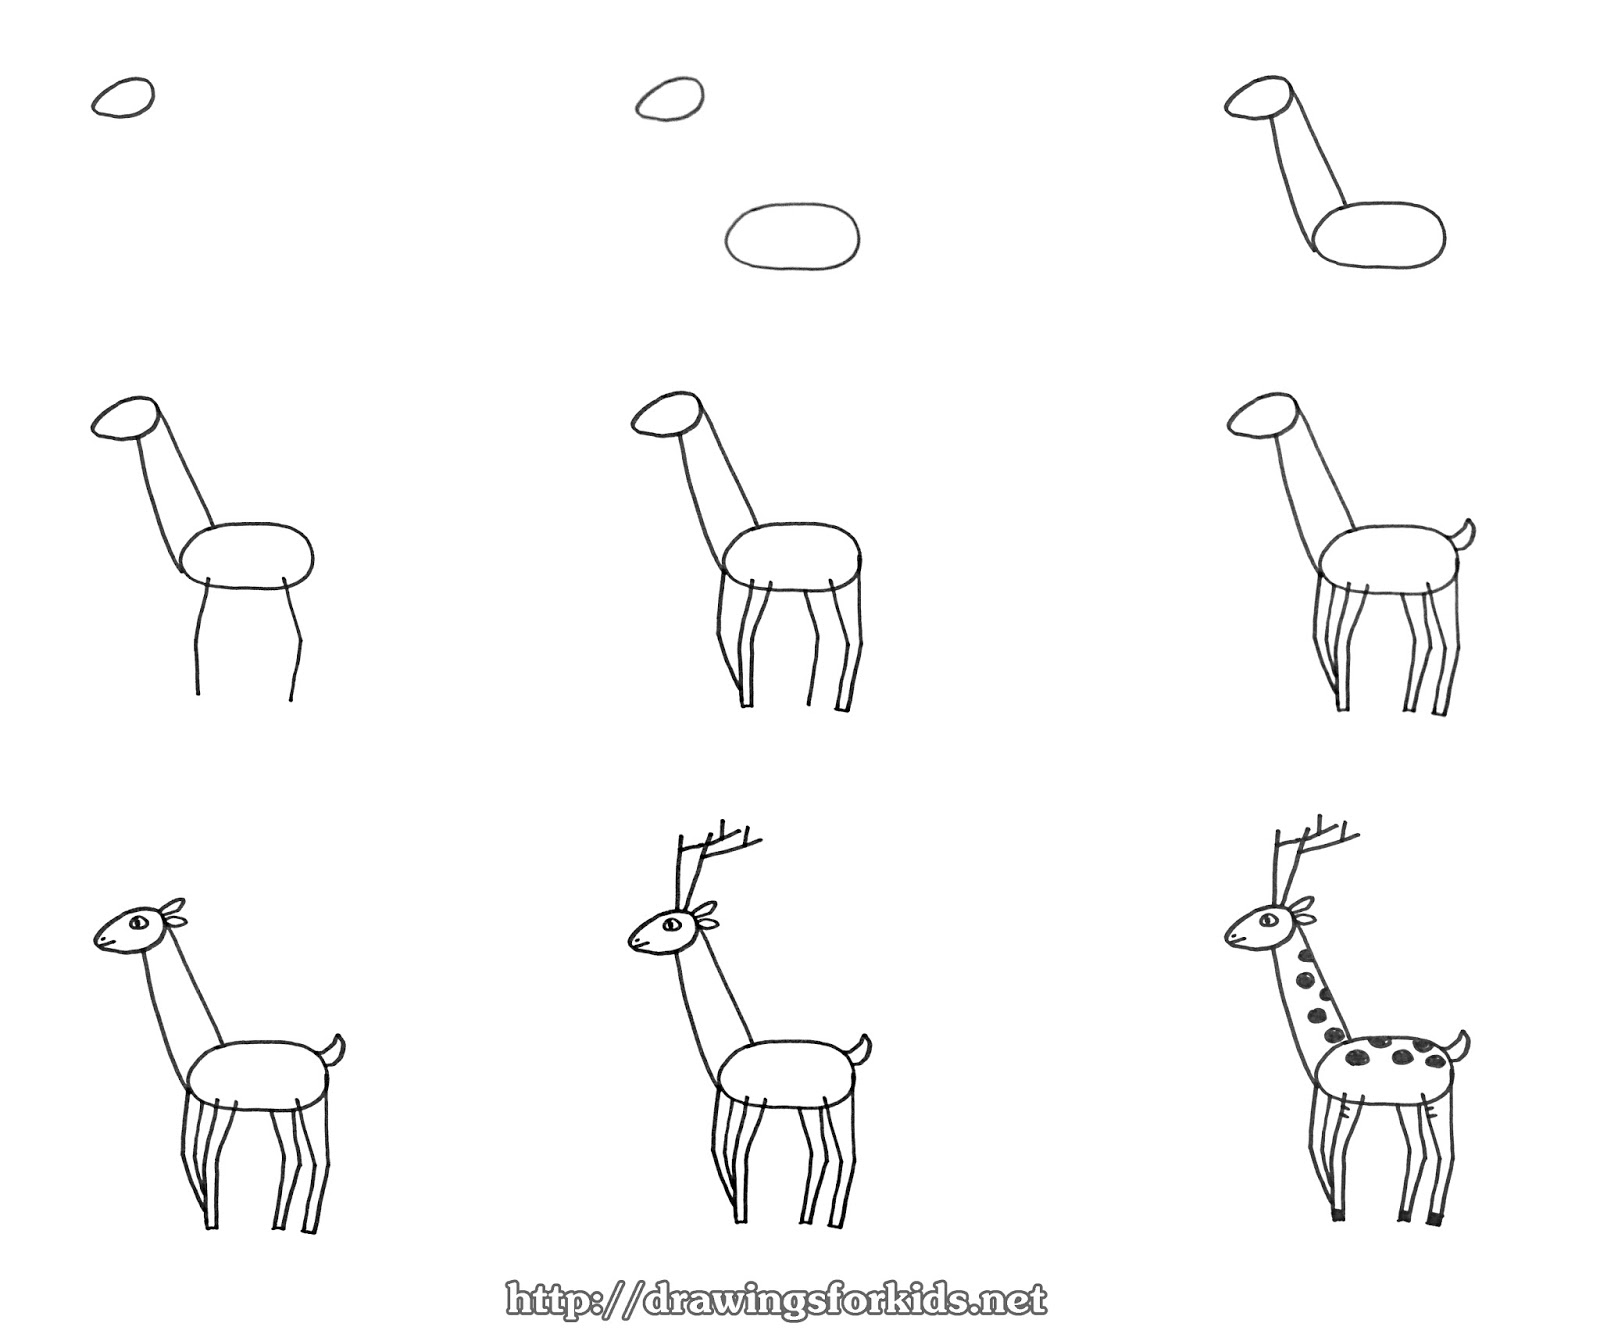 How to draw a Deer for kids - drawingsforkids.net